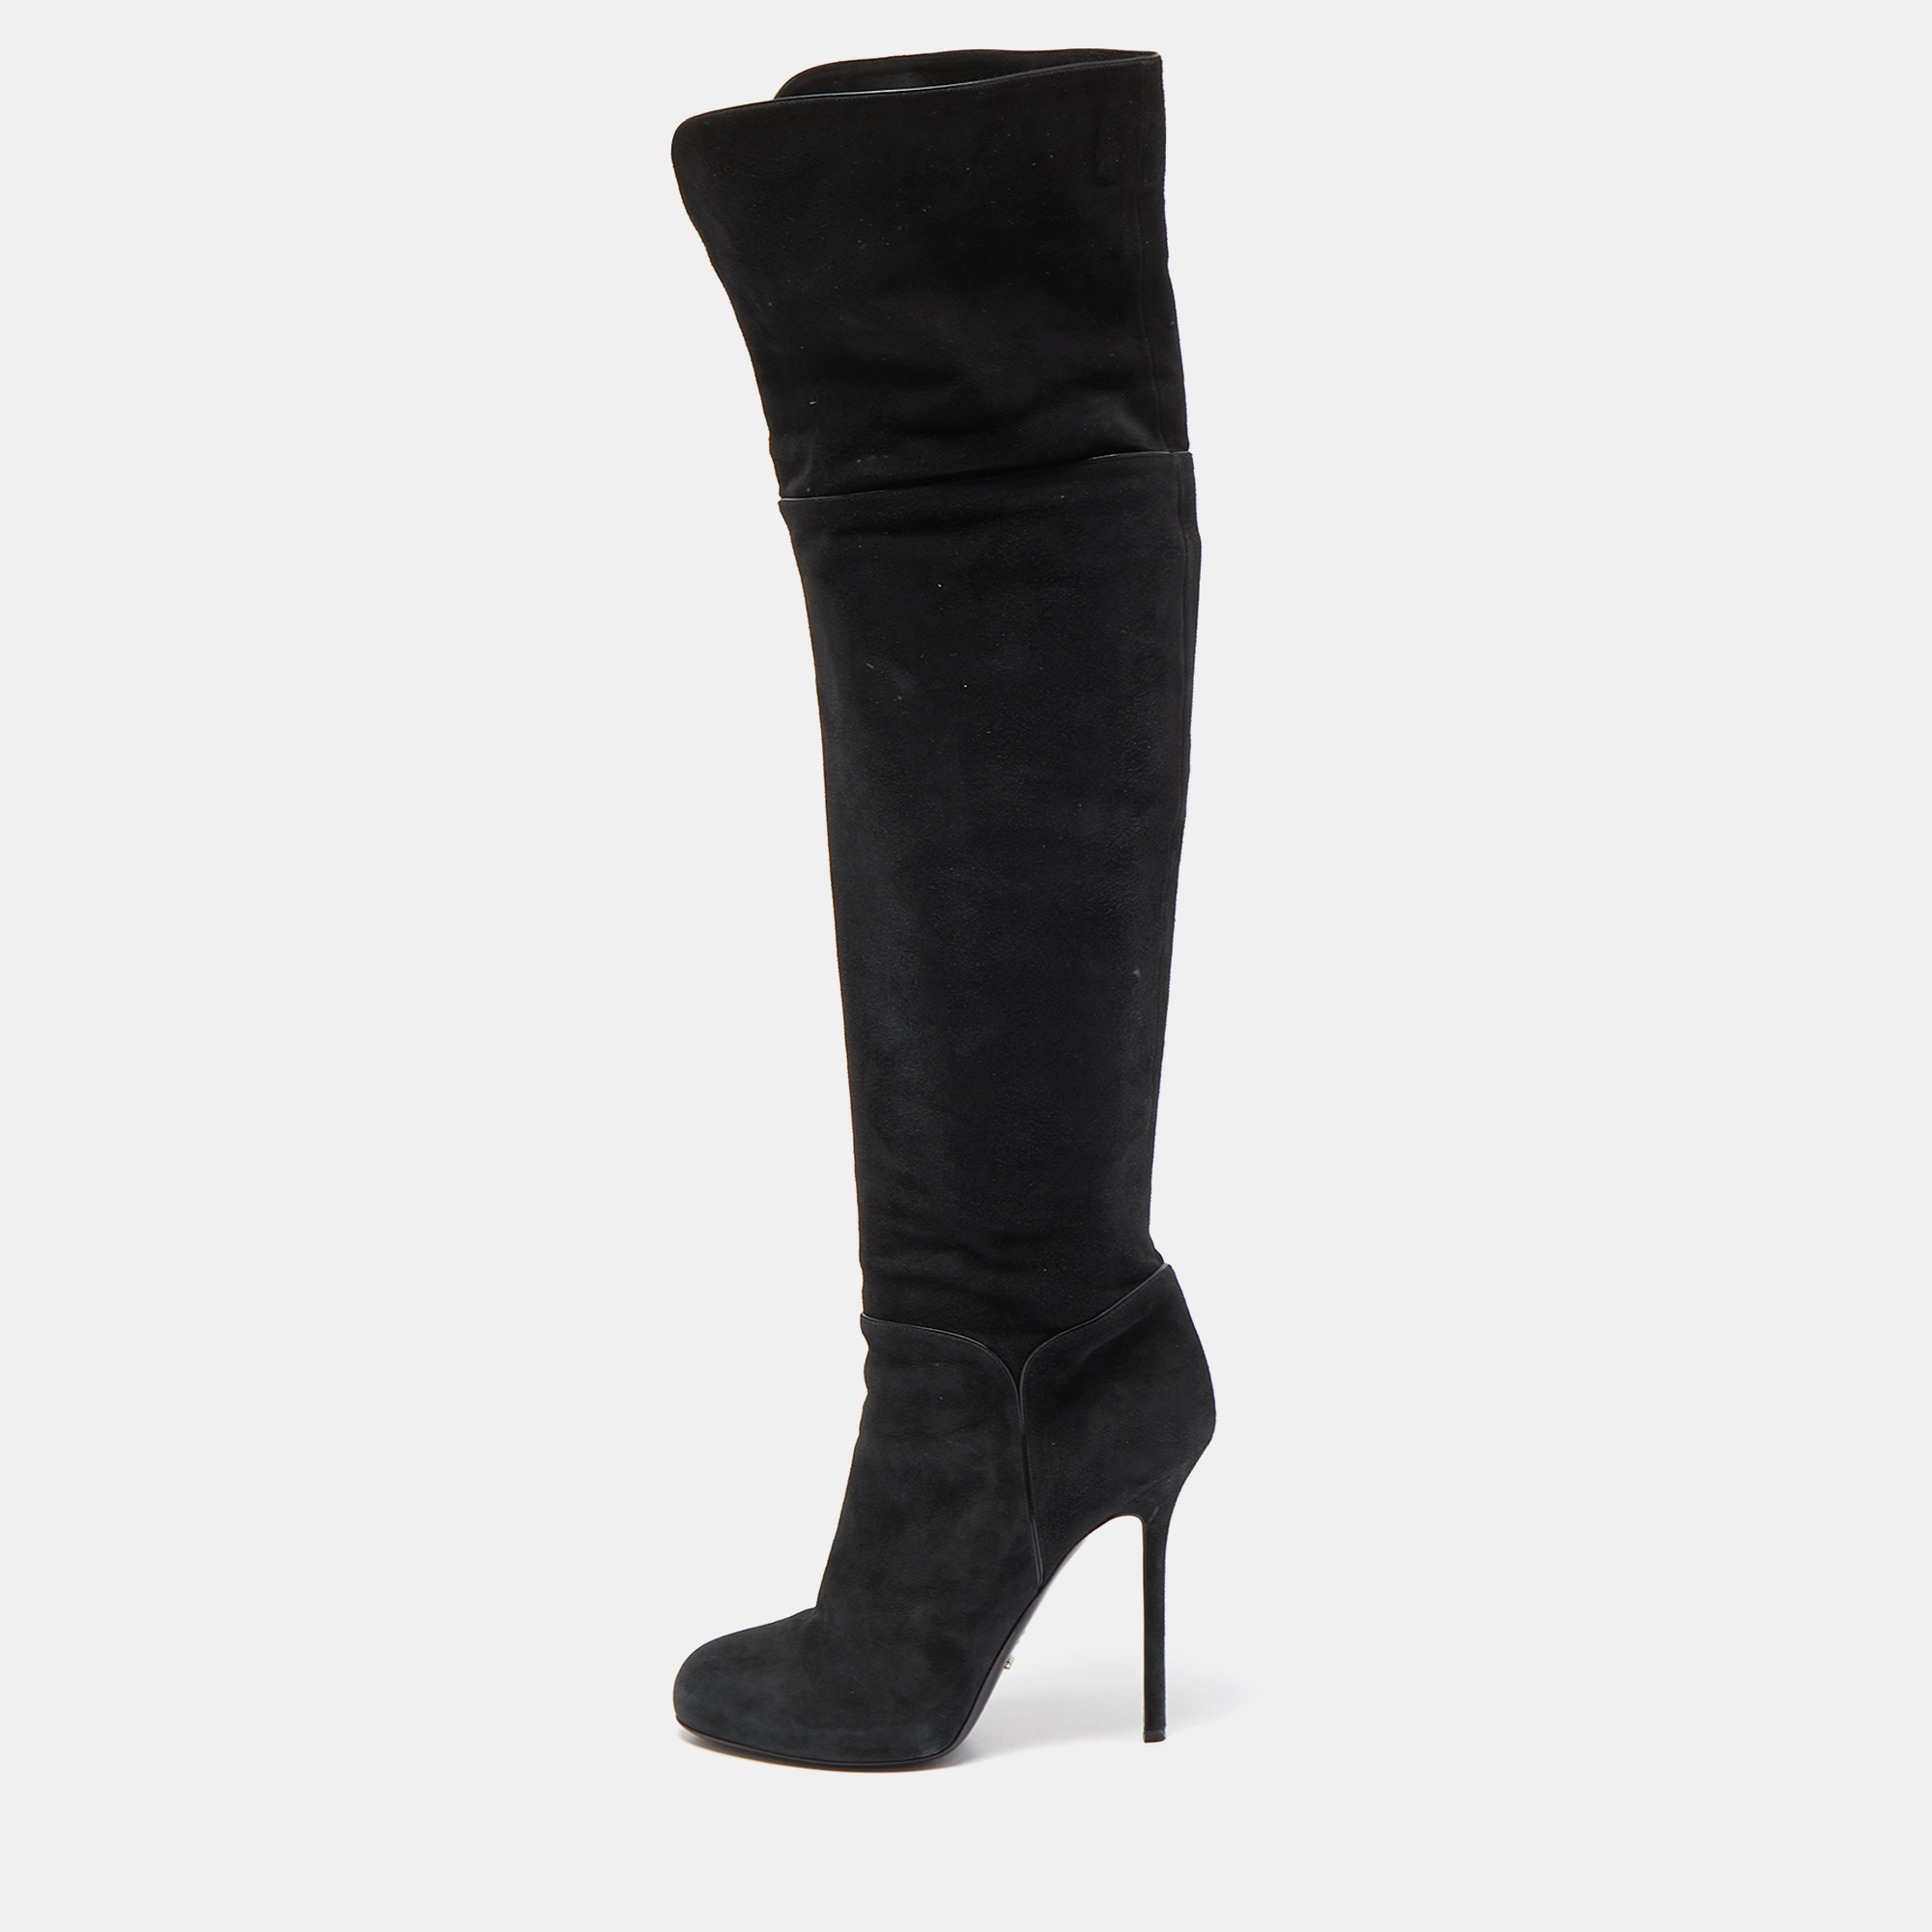 Pre-owned Sergio Rossi Black Suede Knee Length Boots Size 41